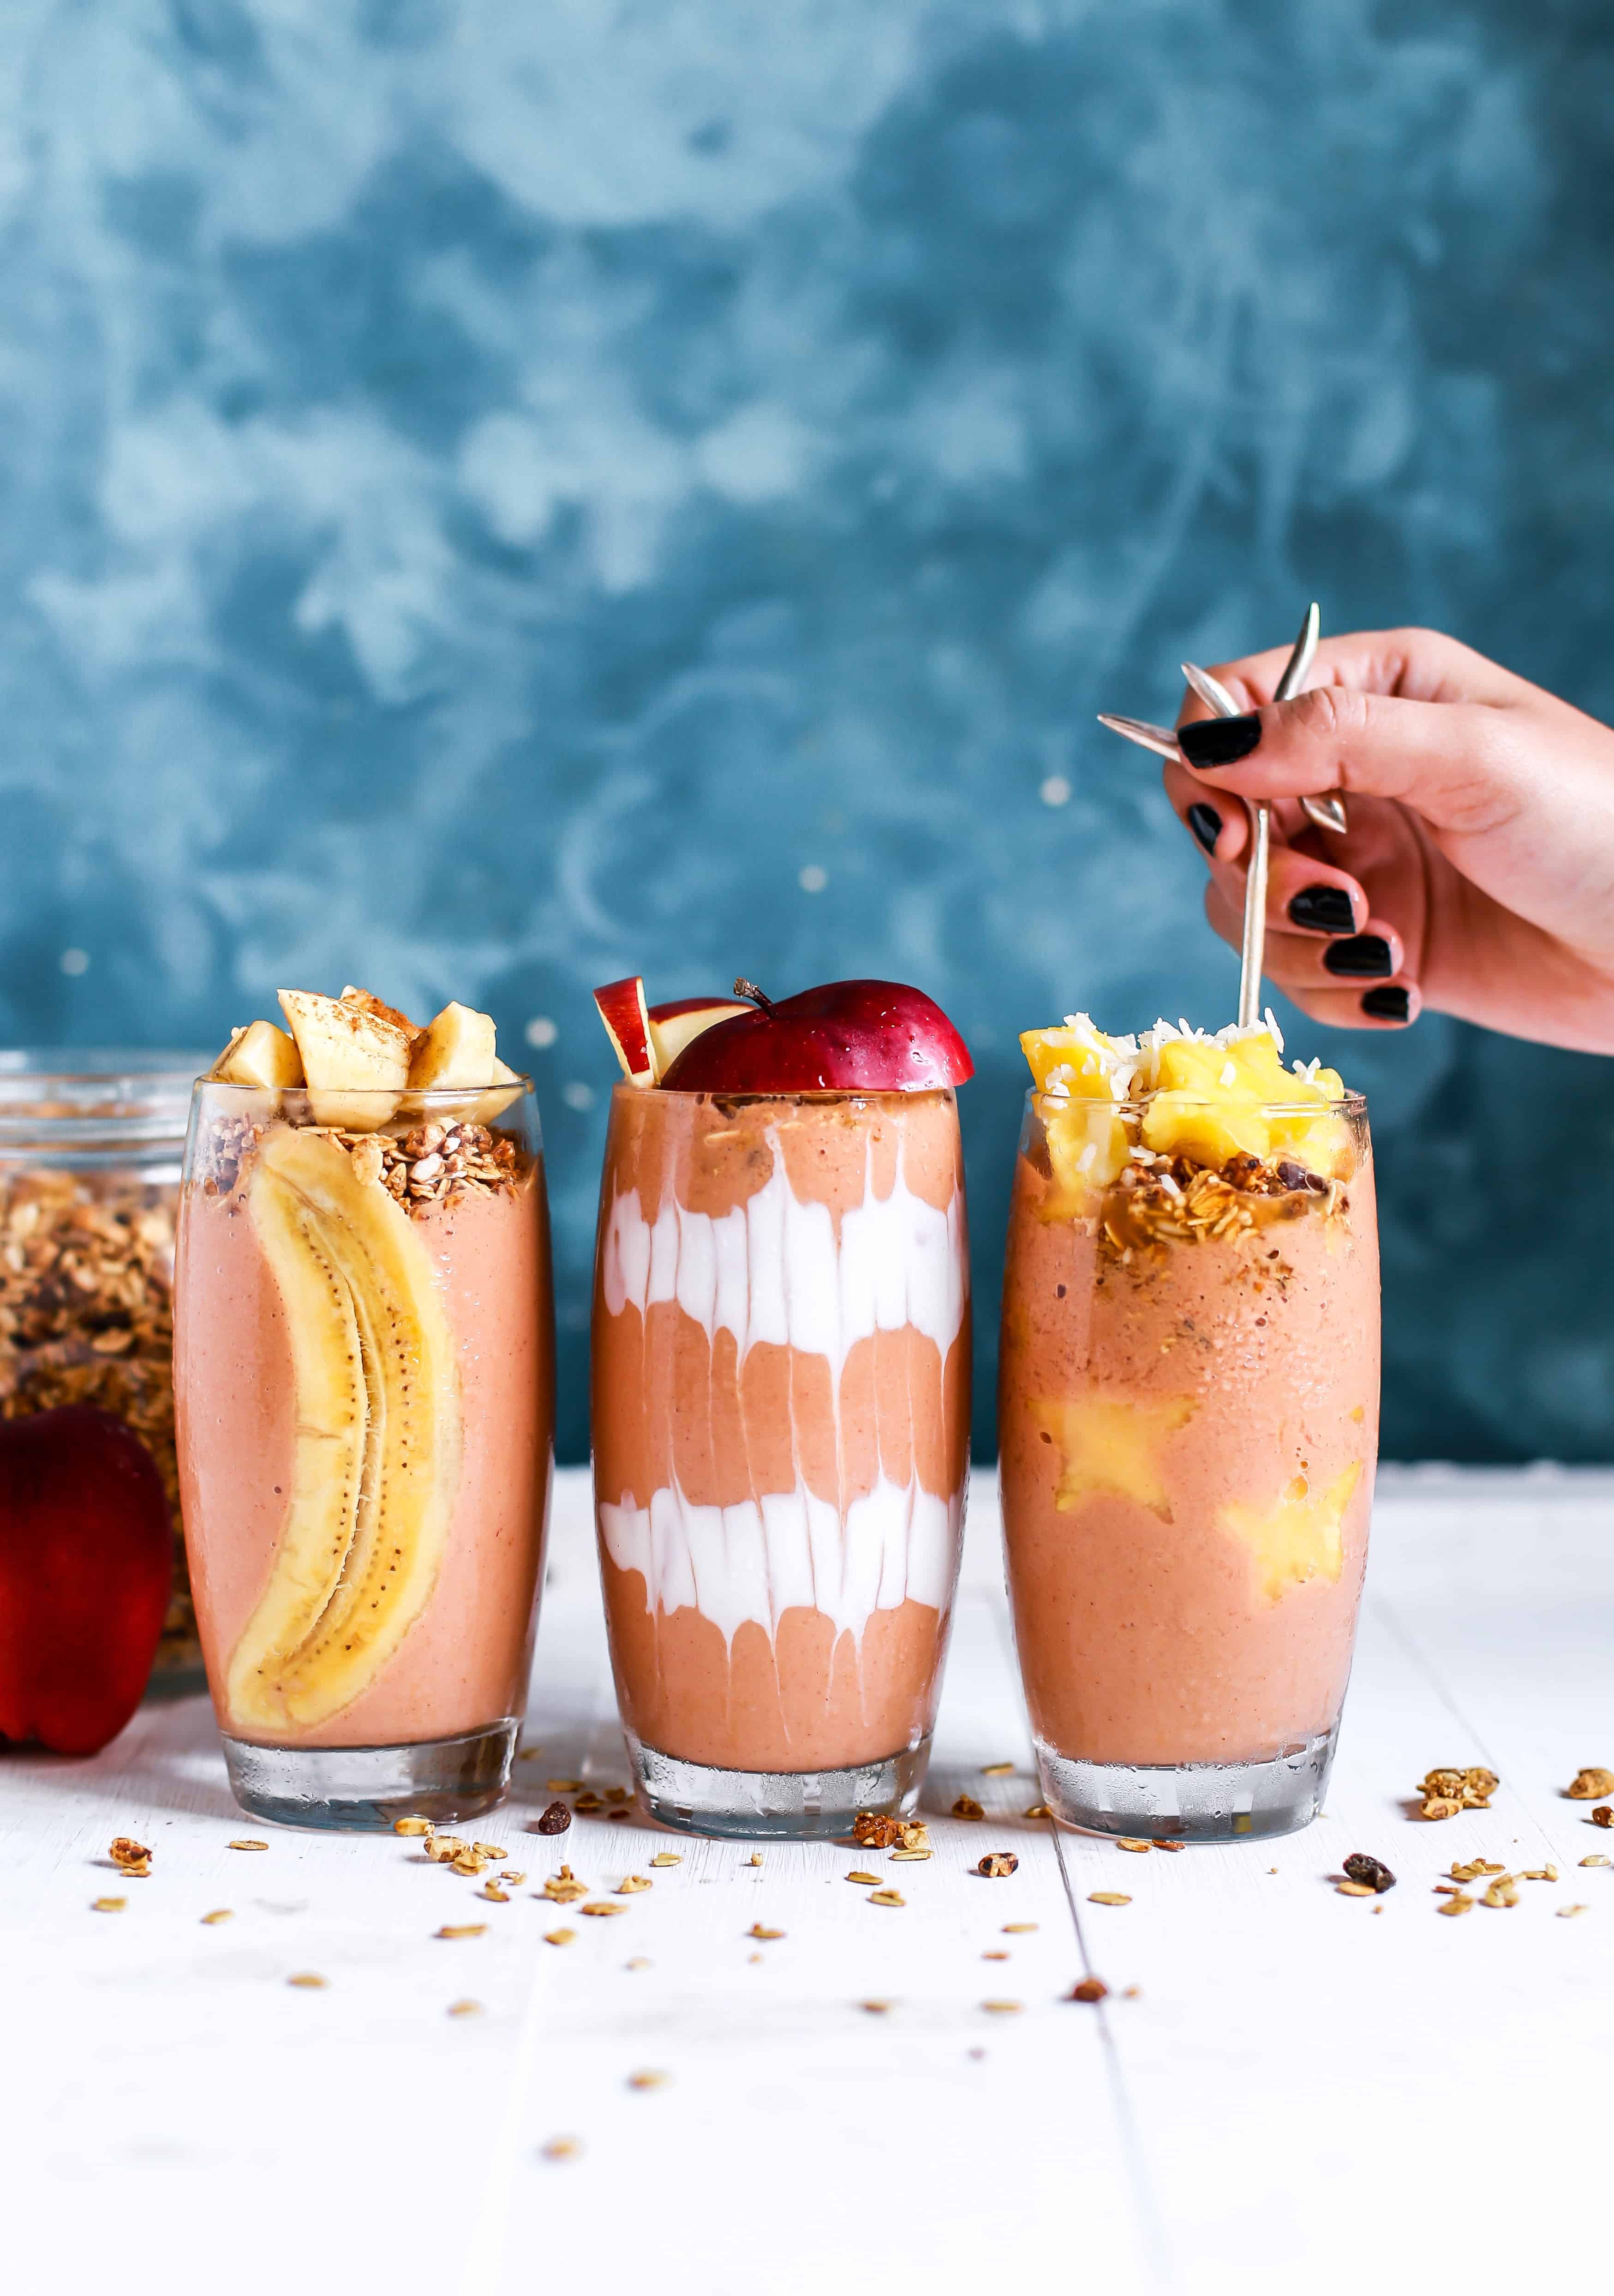 How These Healthy Smoothies Can Prevent You From Binge Eating And Help Lose Weight Fast